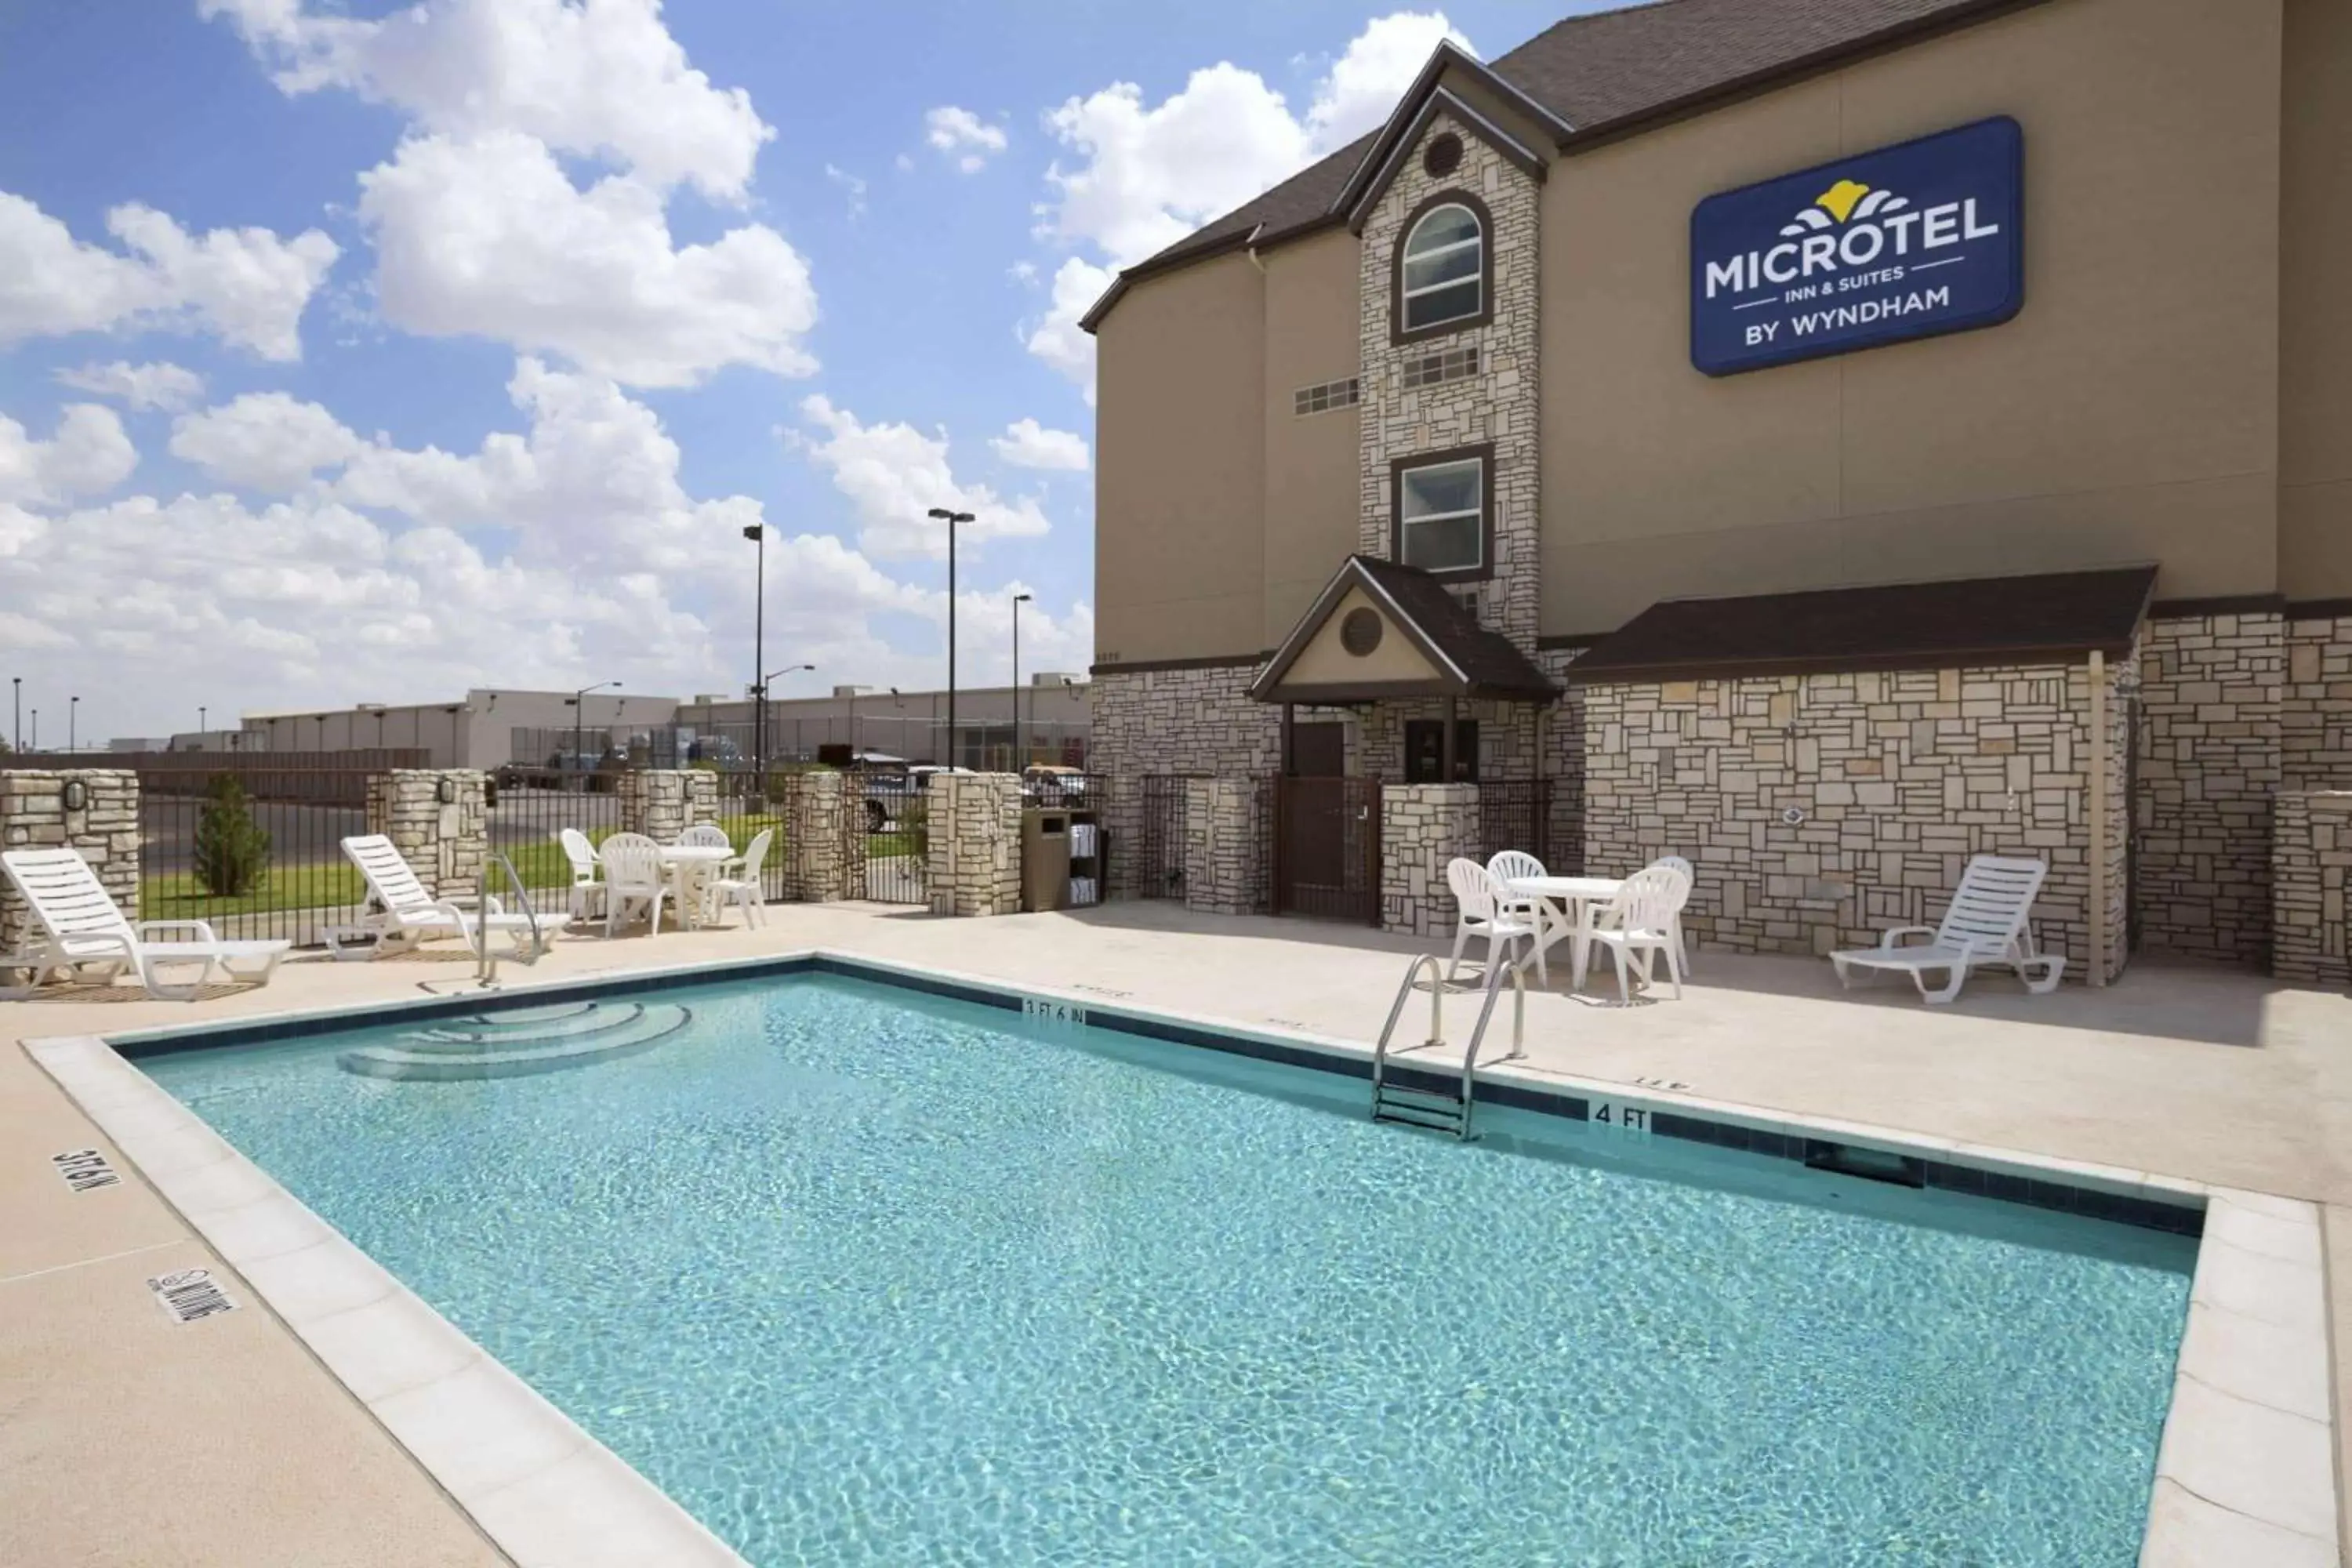 On site, Swimming Pool in Microtel Inn & Suites by Wyndham Odessa TX